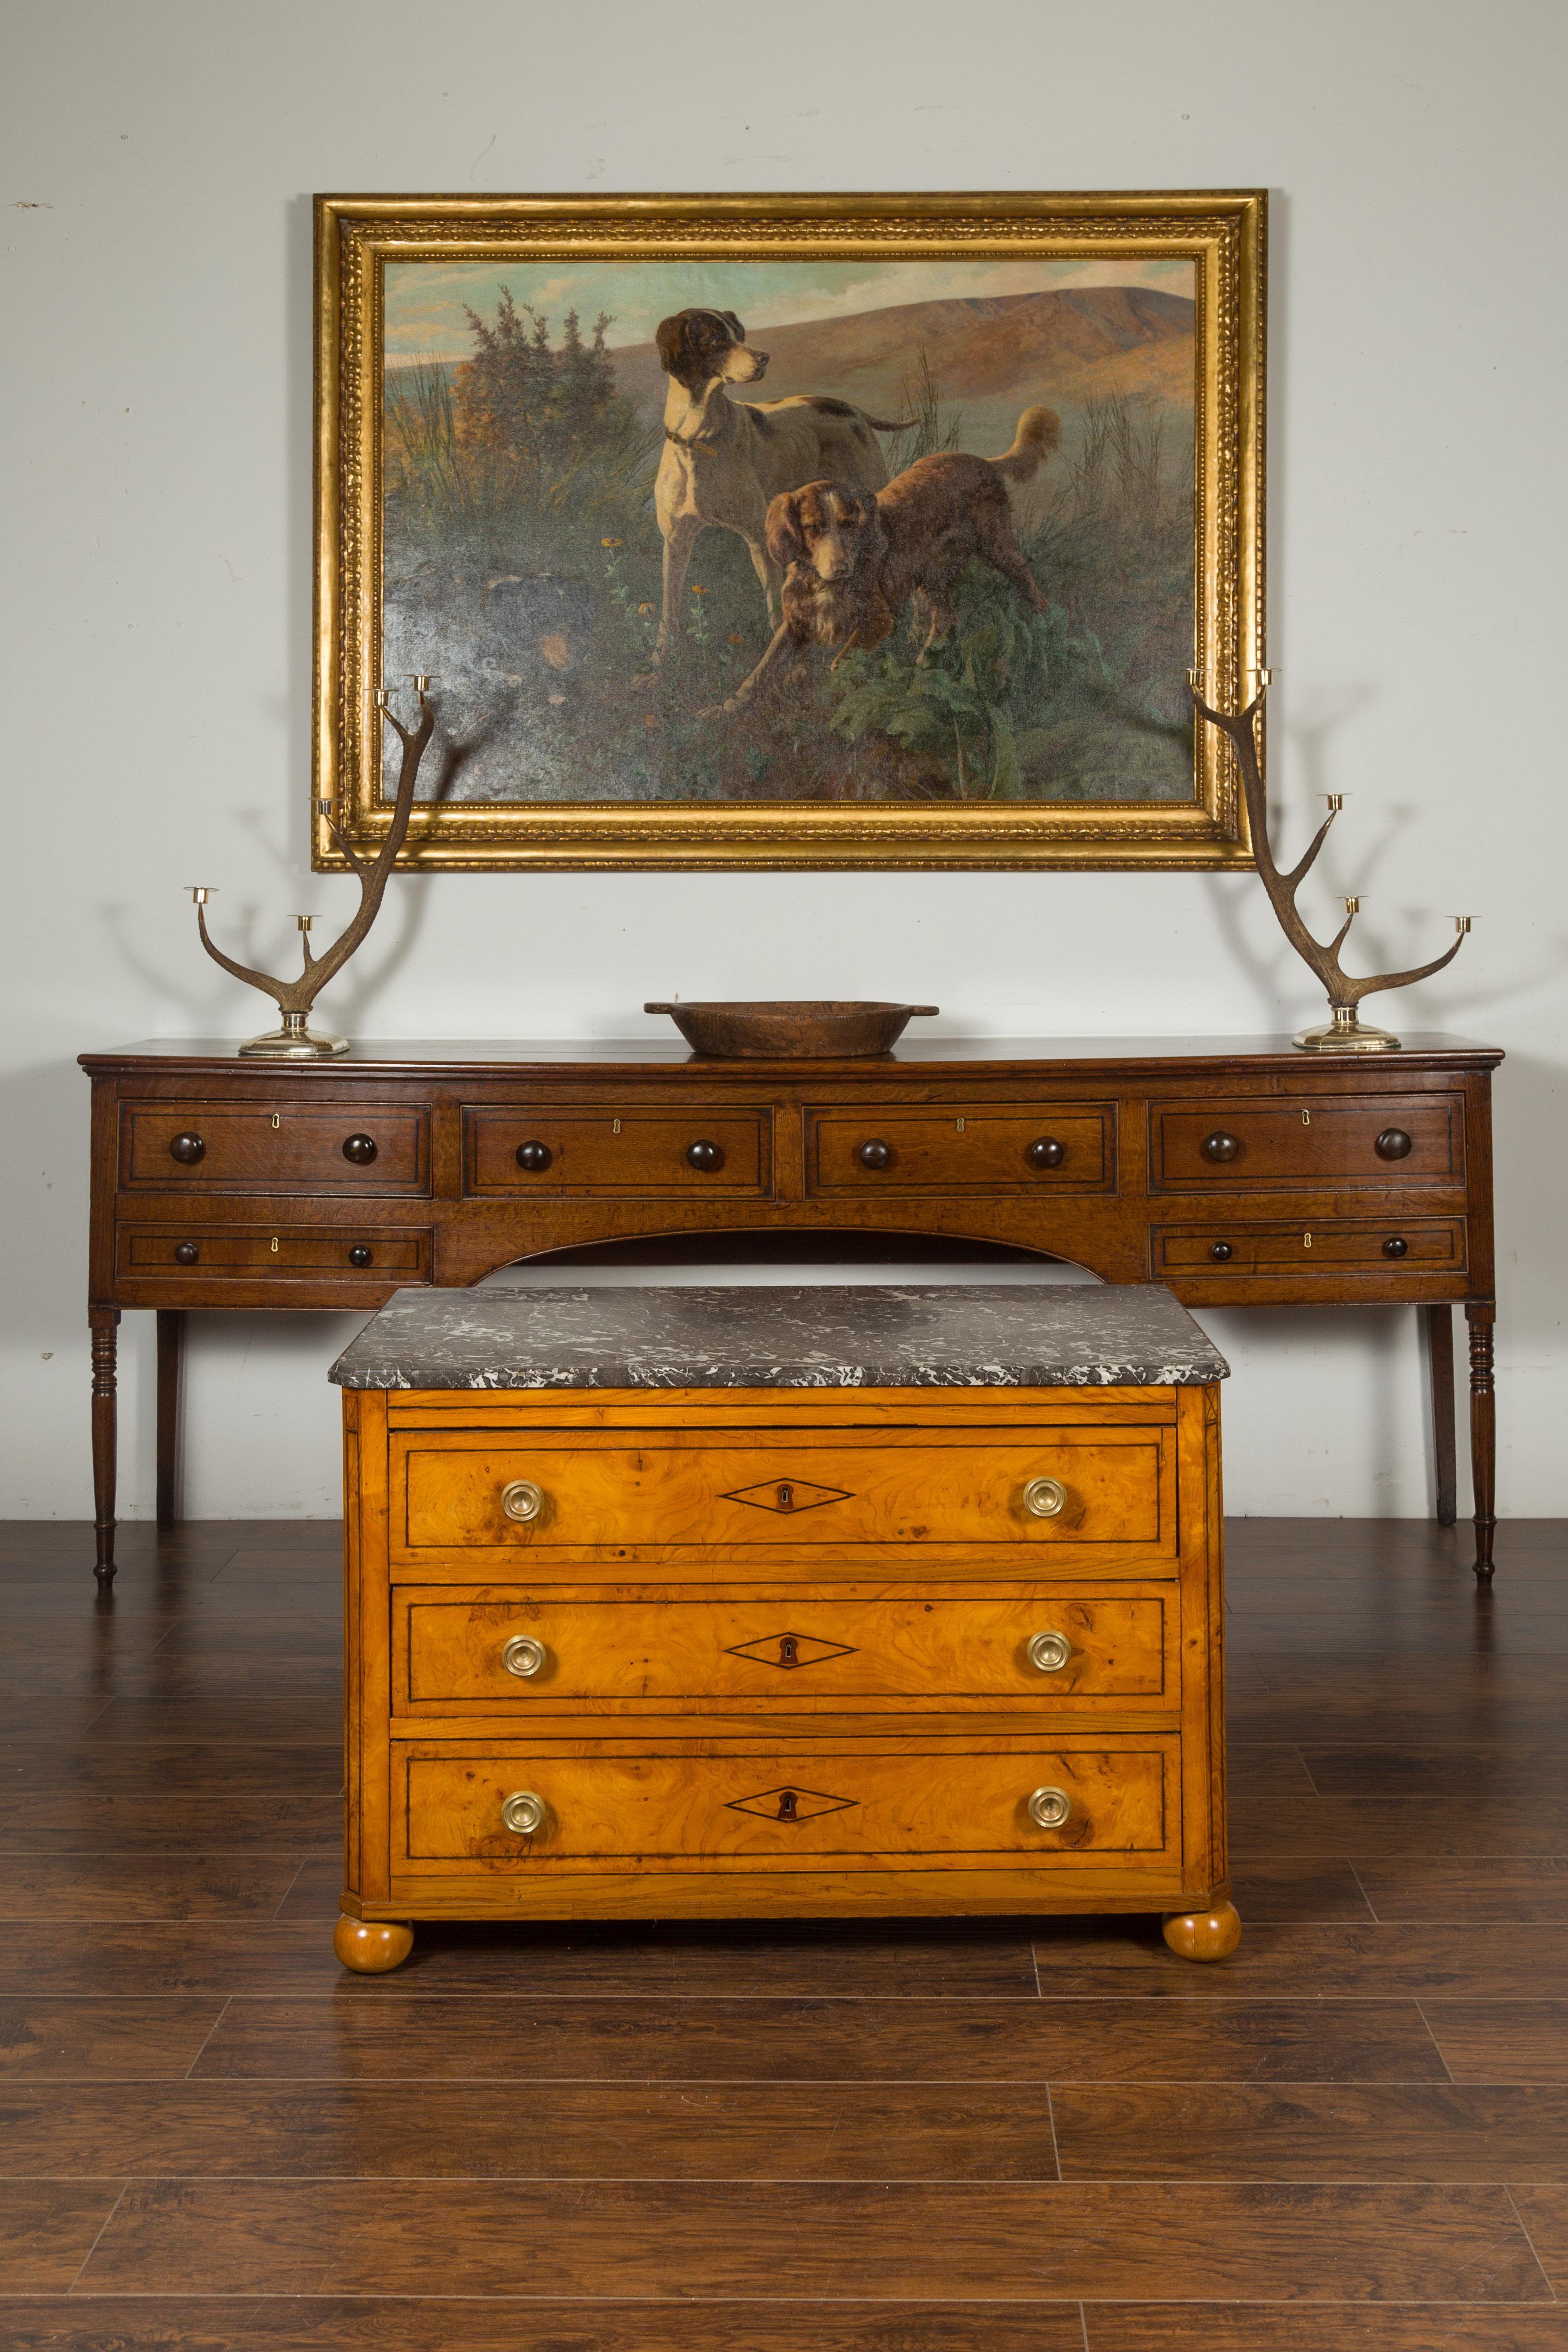 Austrian Biedermeier Period 1840s Walnut Three-Drawer Commode with Grey Marble Top For Sale